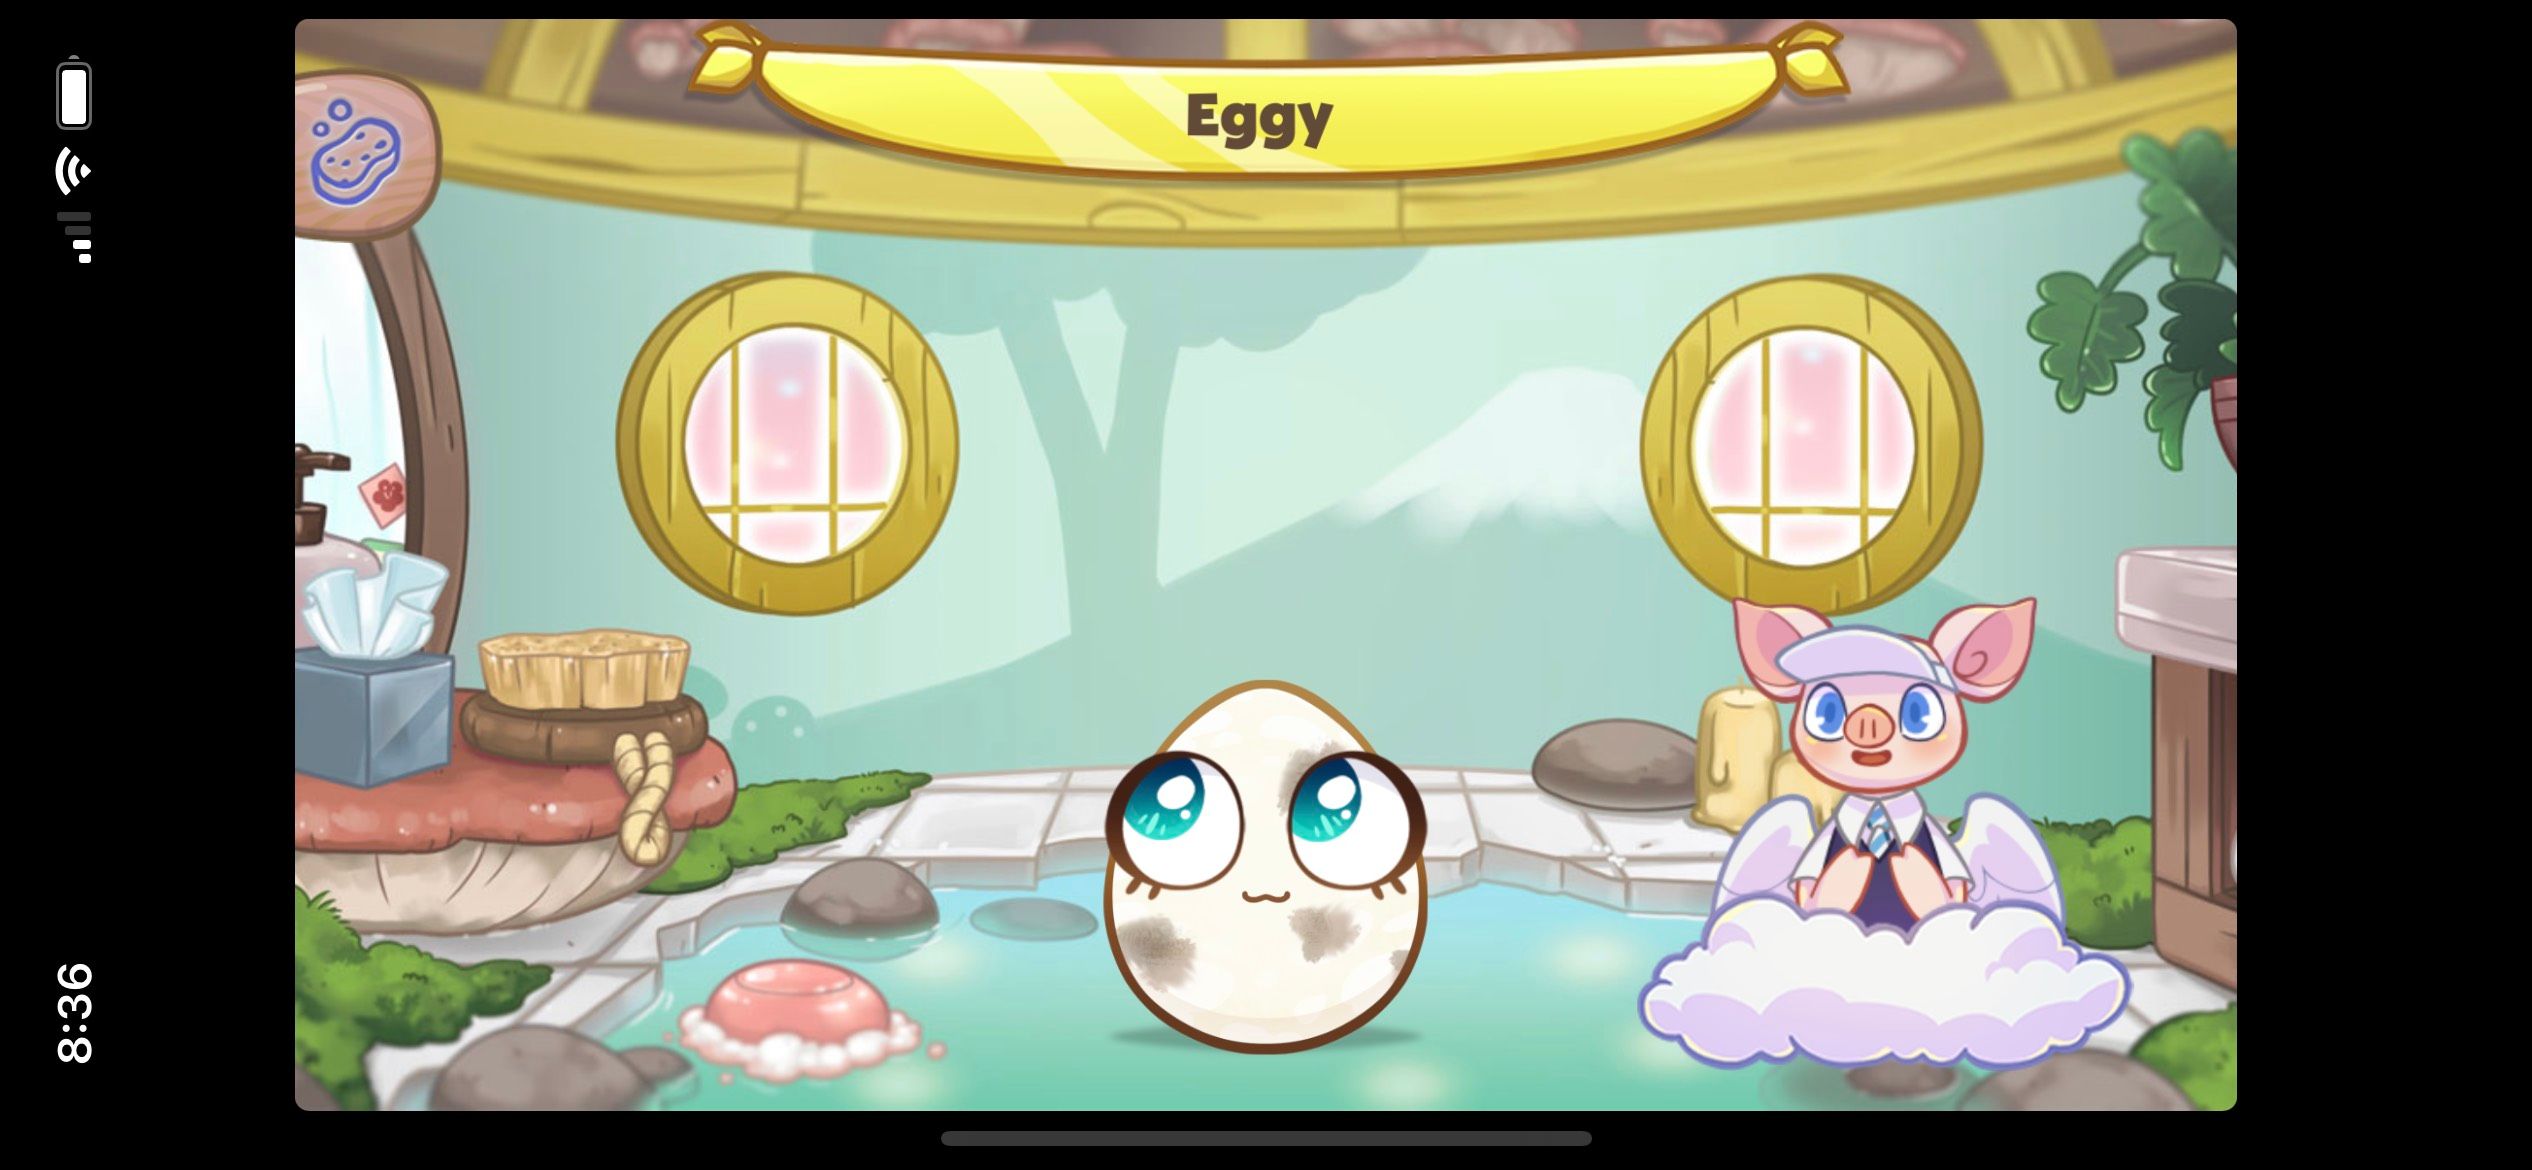 Egg! Dirty Eggy With Piggy Guide in cloud